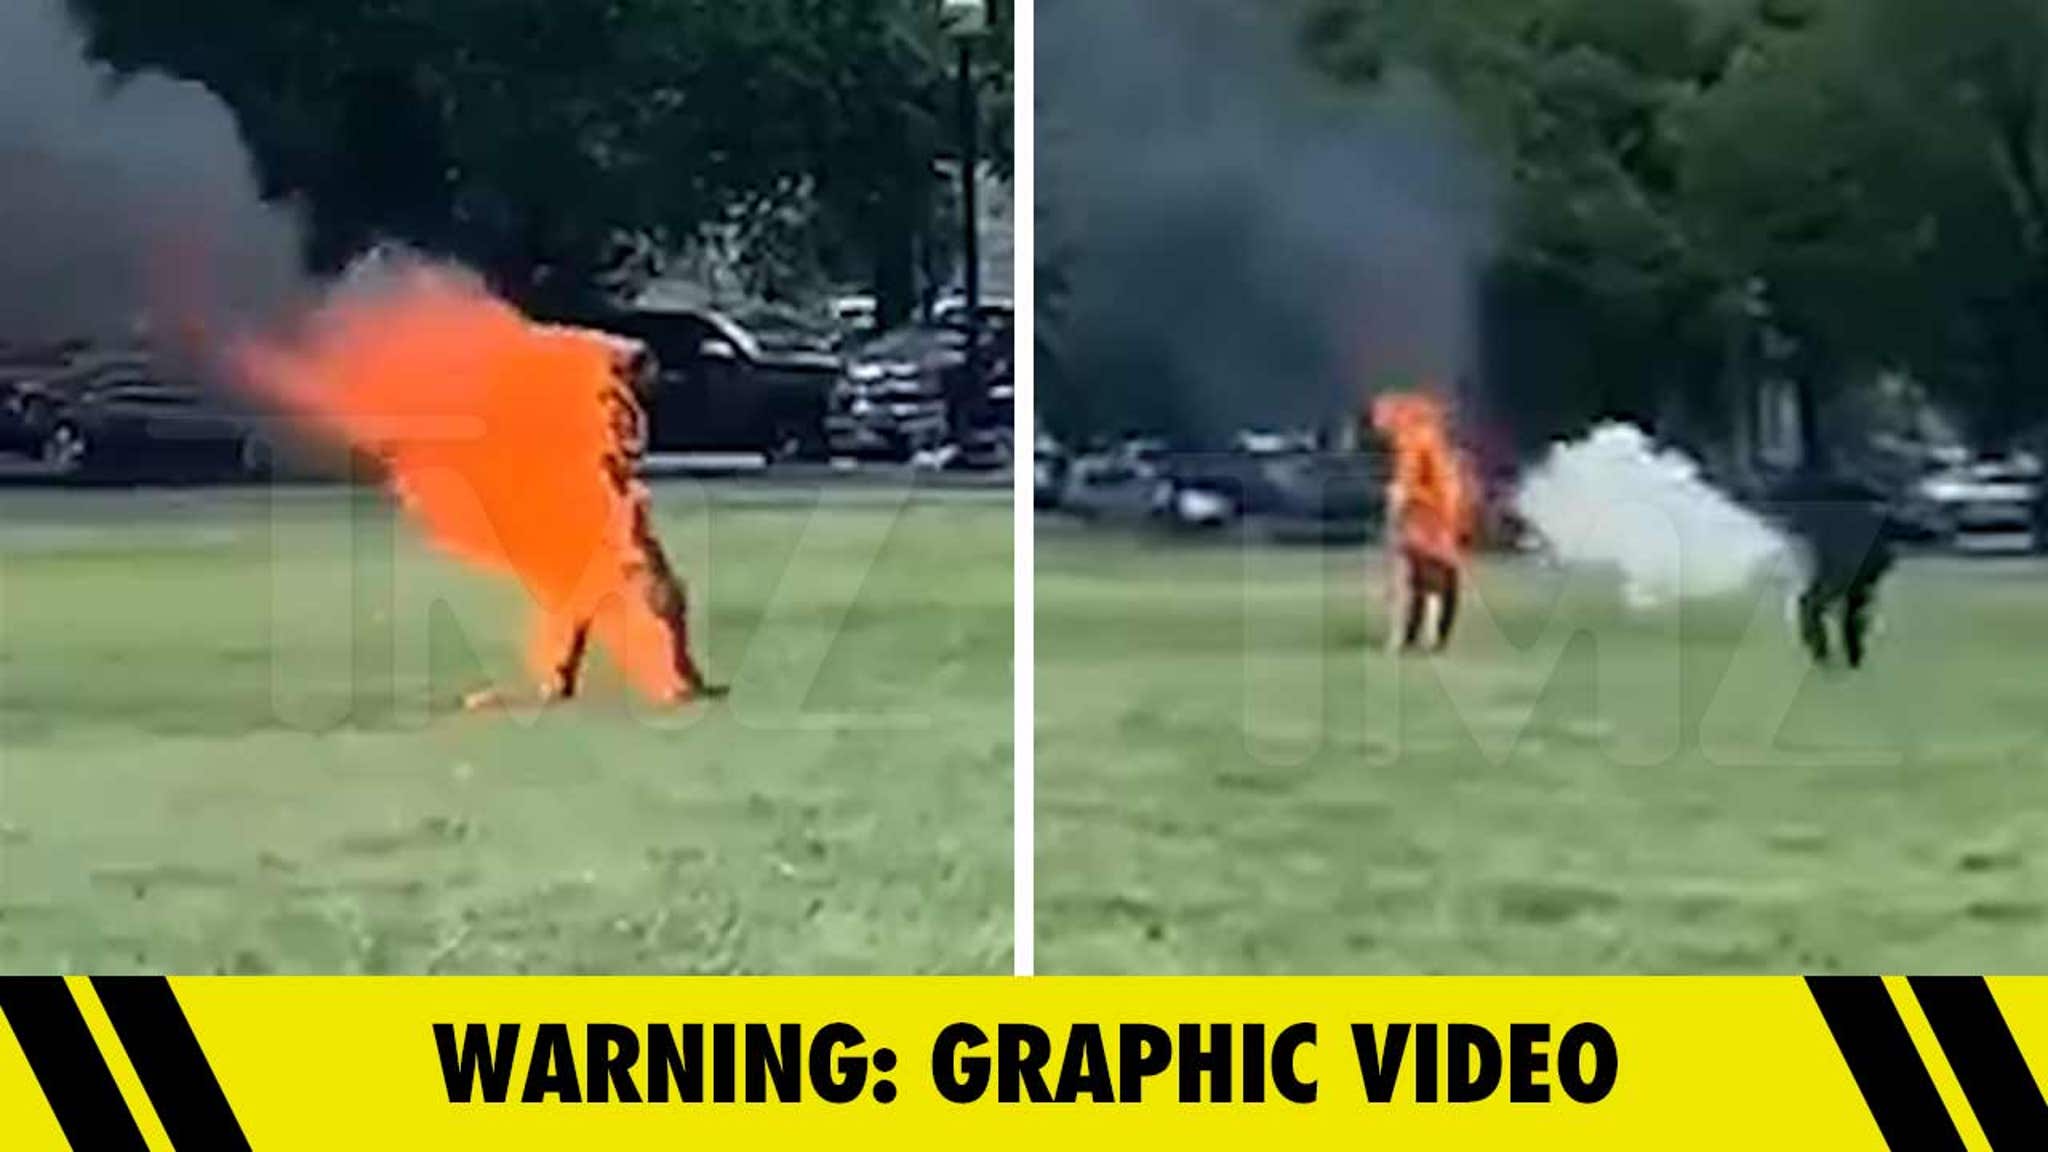 Man Sets Himself on Fire Near White House, Extinguished and Arrested